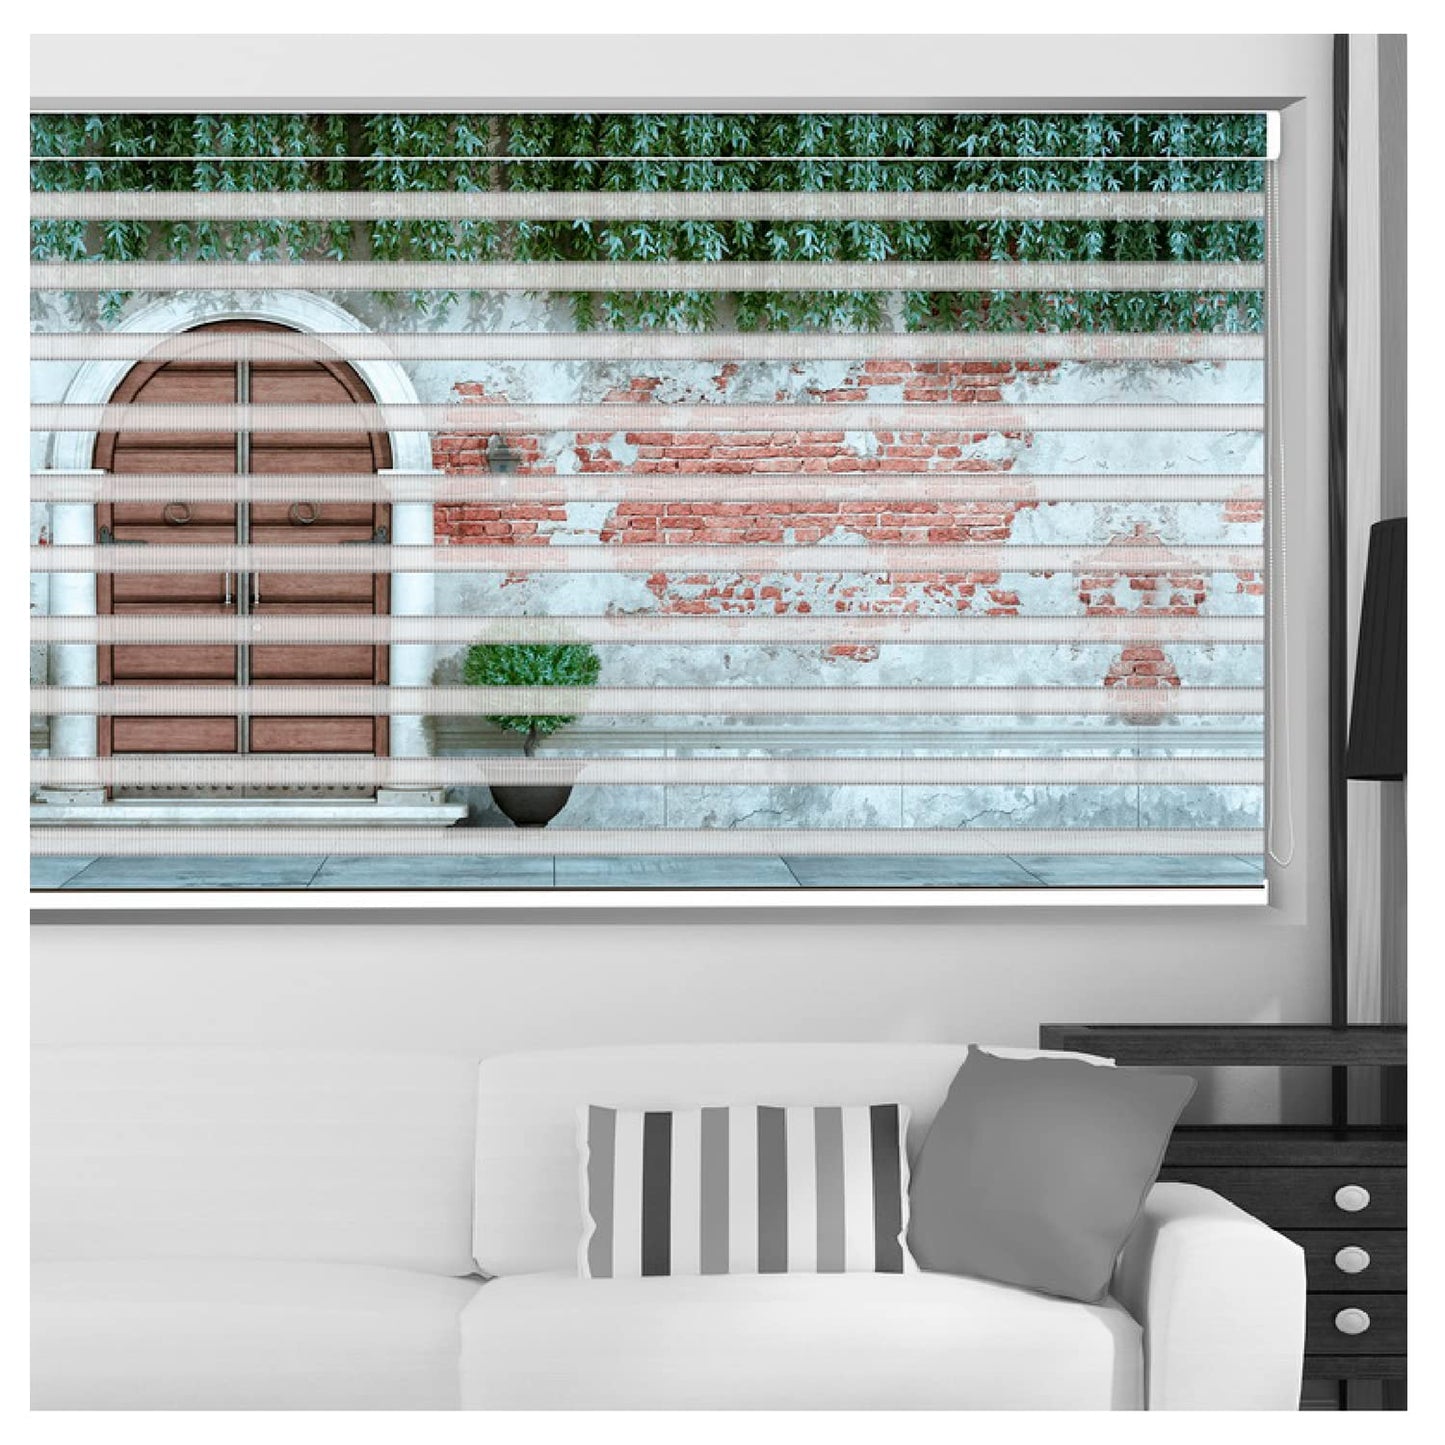 Zebra Blinds for Windows and Doors with Dual Shade, Horizontal Stripes, Blinds for Home & Office (Customized Size, Home Art)